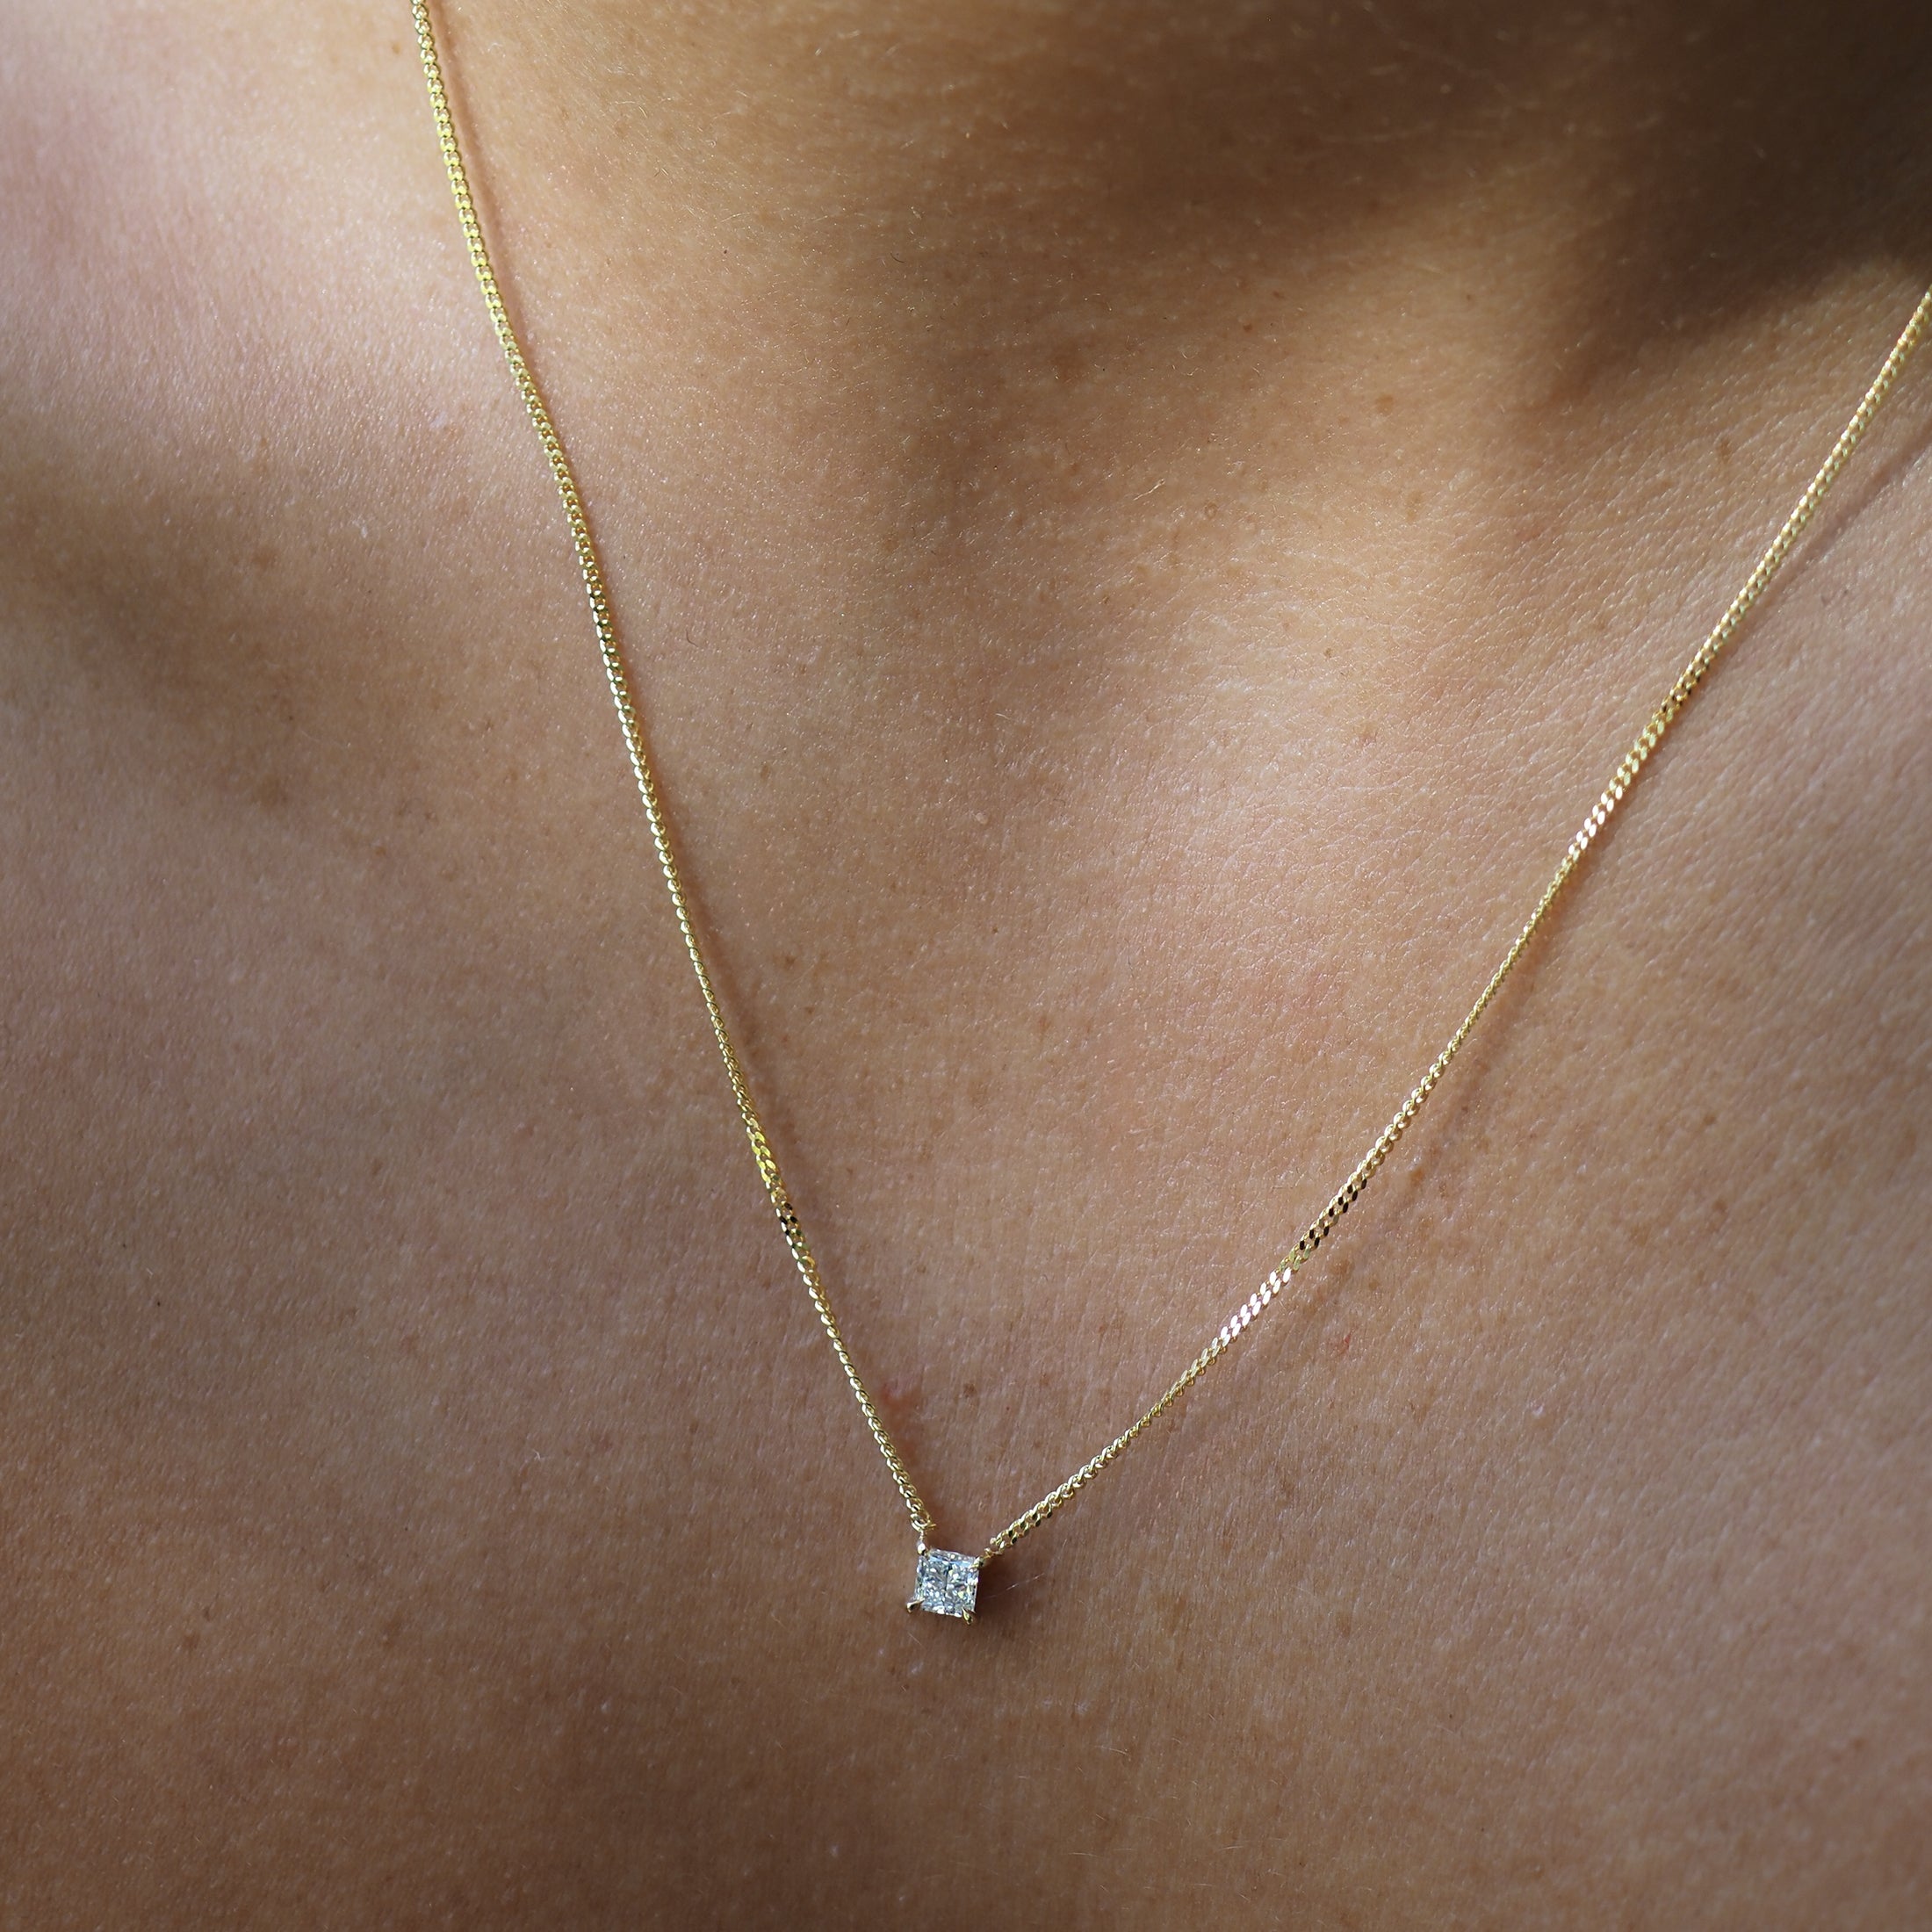 The Princess Diamond Necklace is fixed along a yellow gold chain and features a square cut lab-grown diamond handset within four claws. 